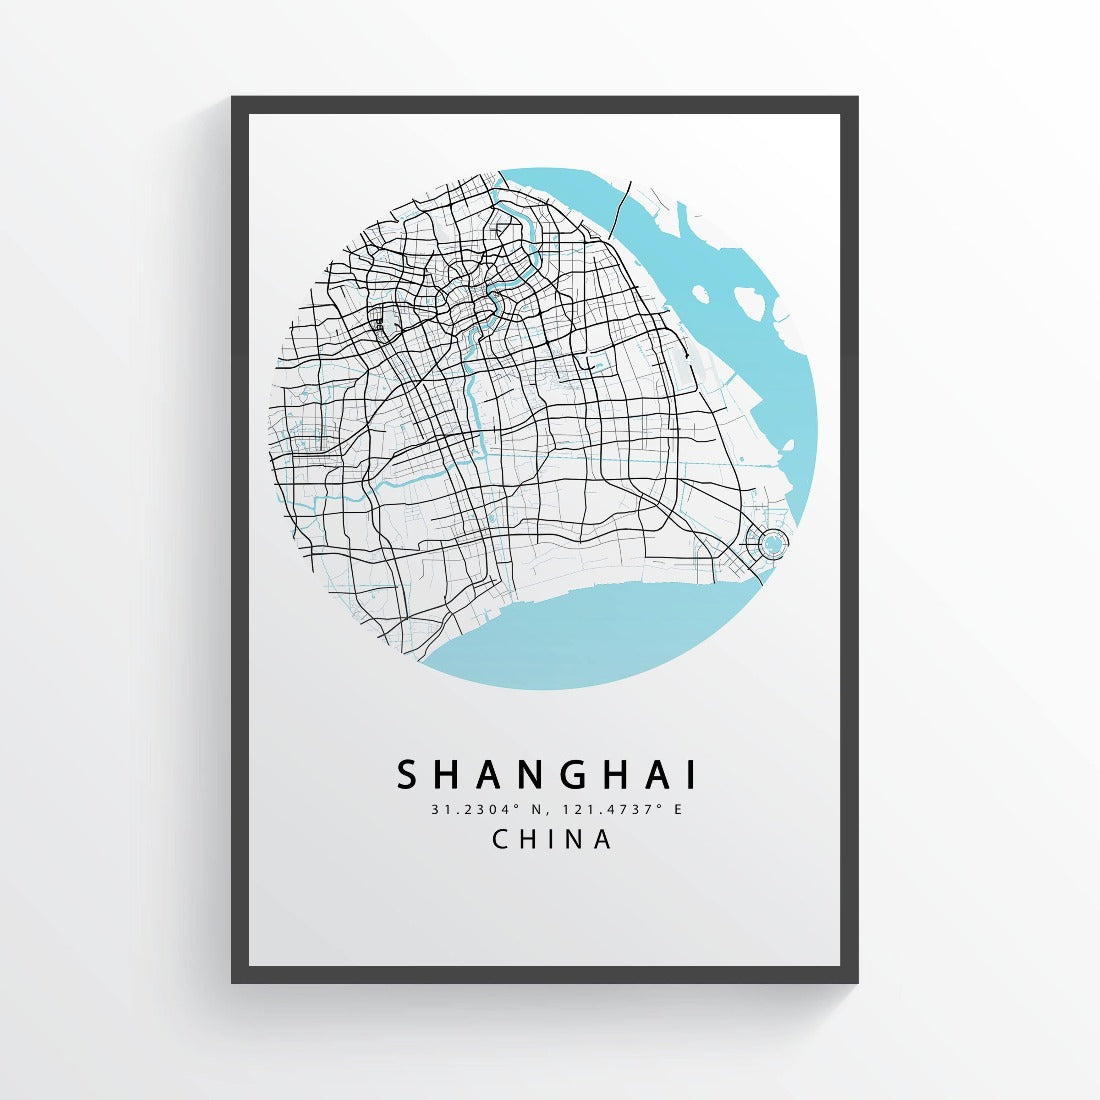 Get to know the "Paris of the East" with this Shanghai City Map Print. This detailed map print provides a comprehensive view of the city, from its top landmarks to its most popular streets. The bright colors and bold lines make it easy to navigate, so you can hit all the must-see spots on your list. With this map print, you'll be ready to conquer Shanghai in style.- 98types